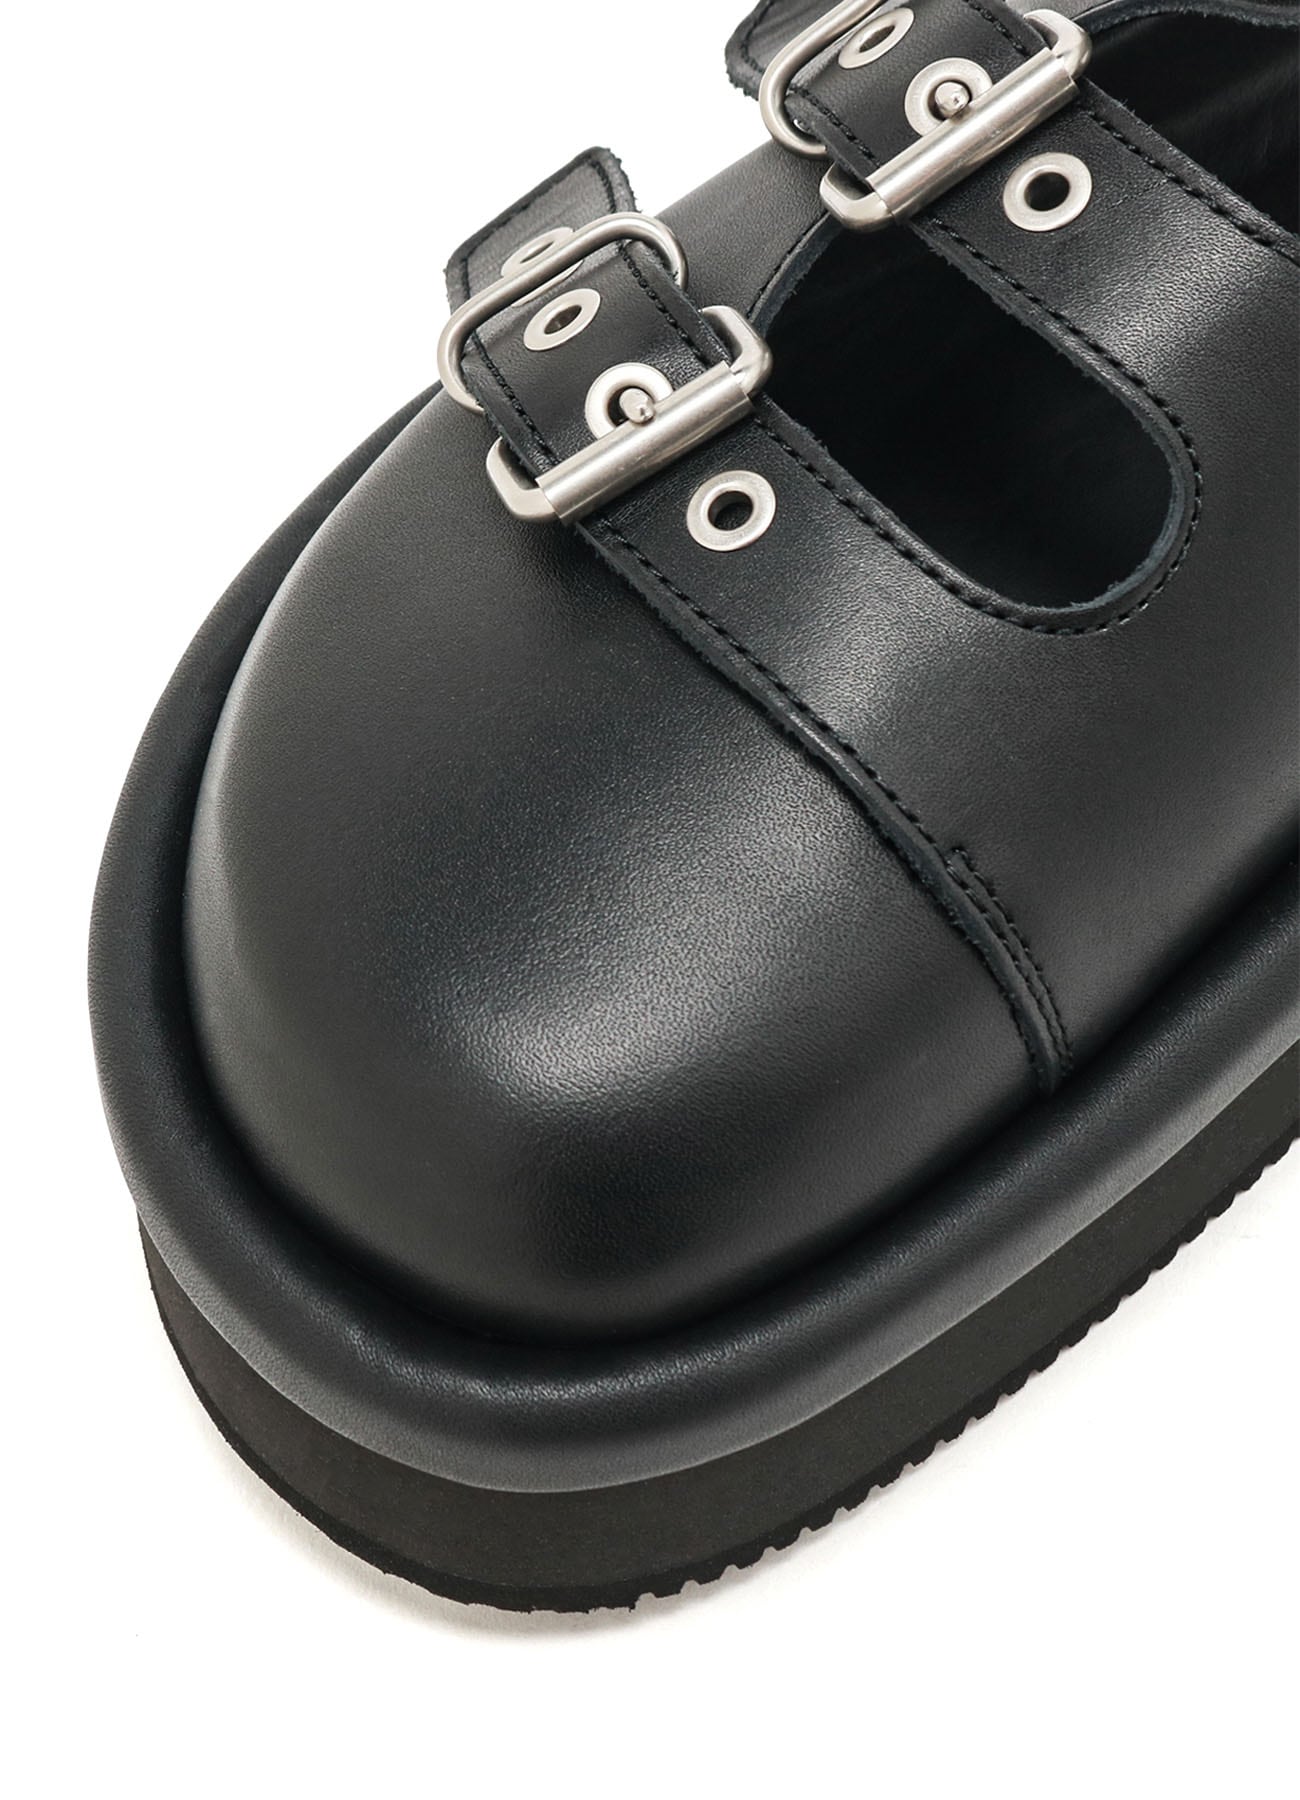 【7/17 12:00 Release】COW LEATHER SANDAL